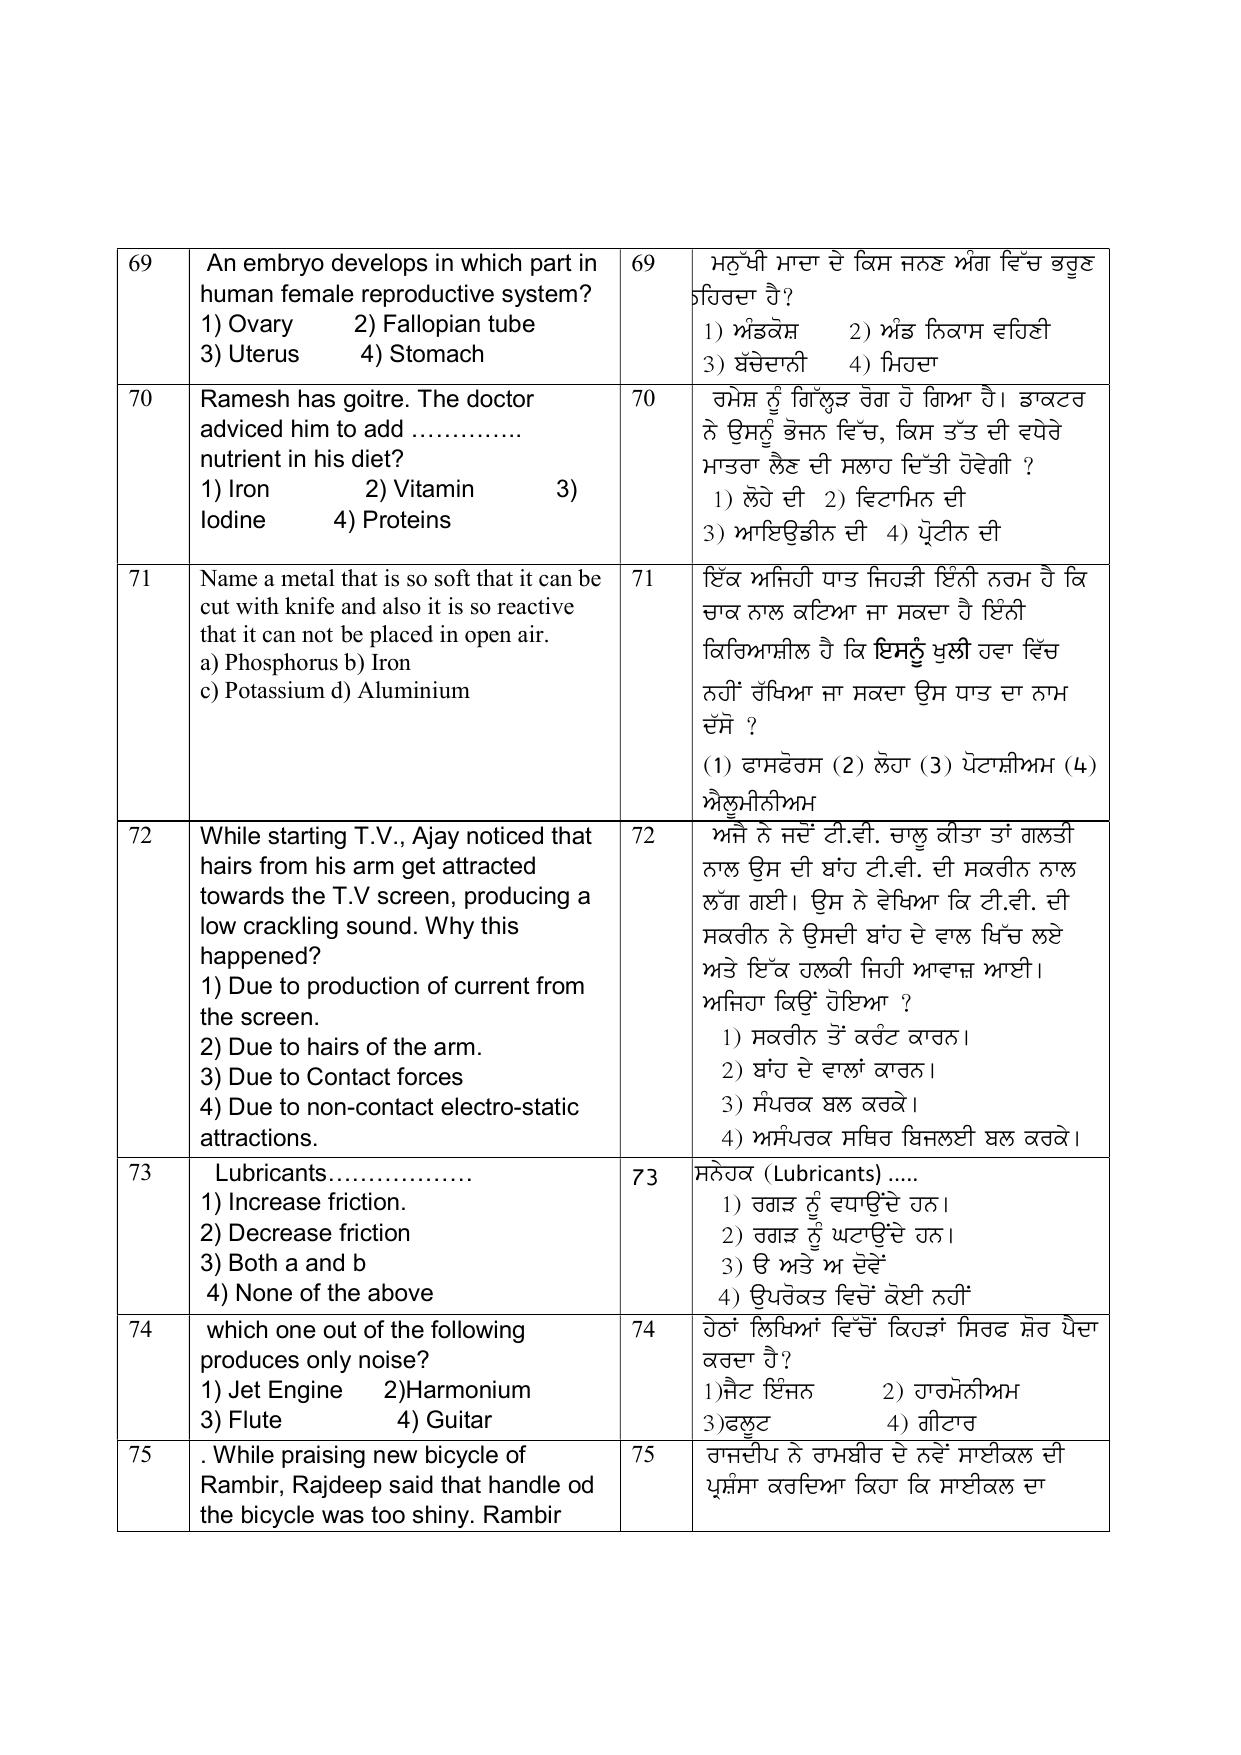 Punjab School of Eminence Class 9 Sample Question Paper - Page 13